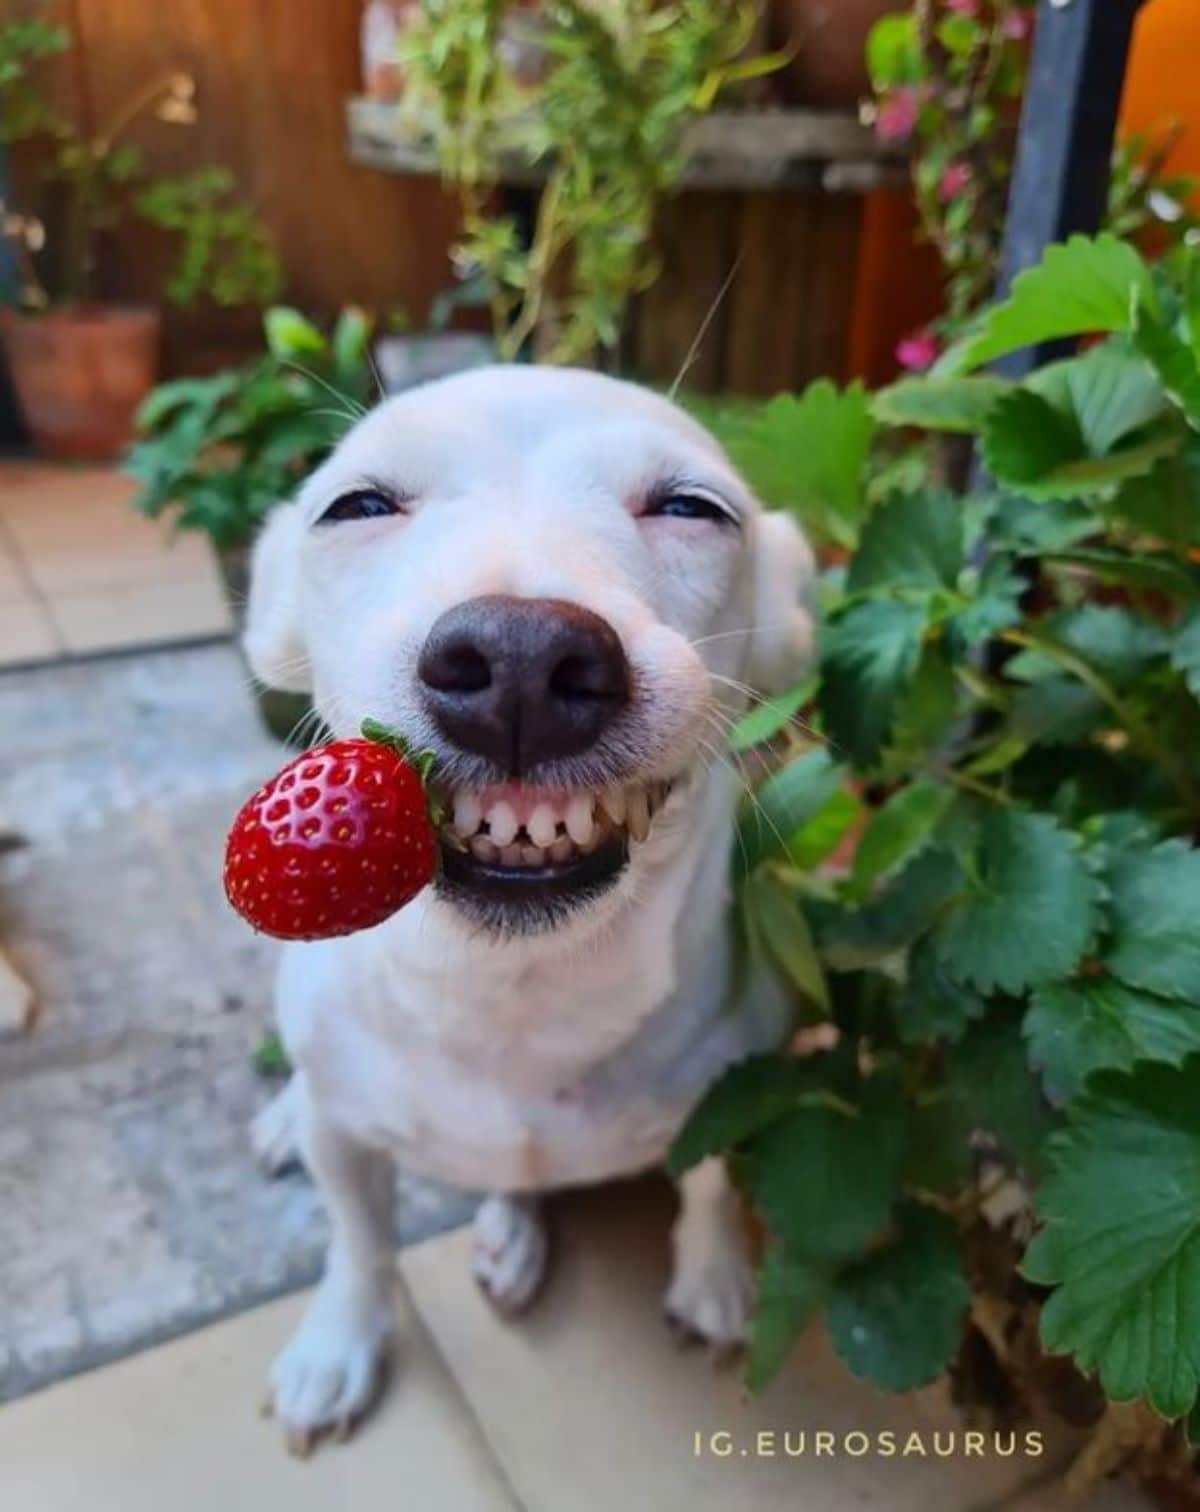 white dog holding a red strawberry by the stem